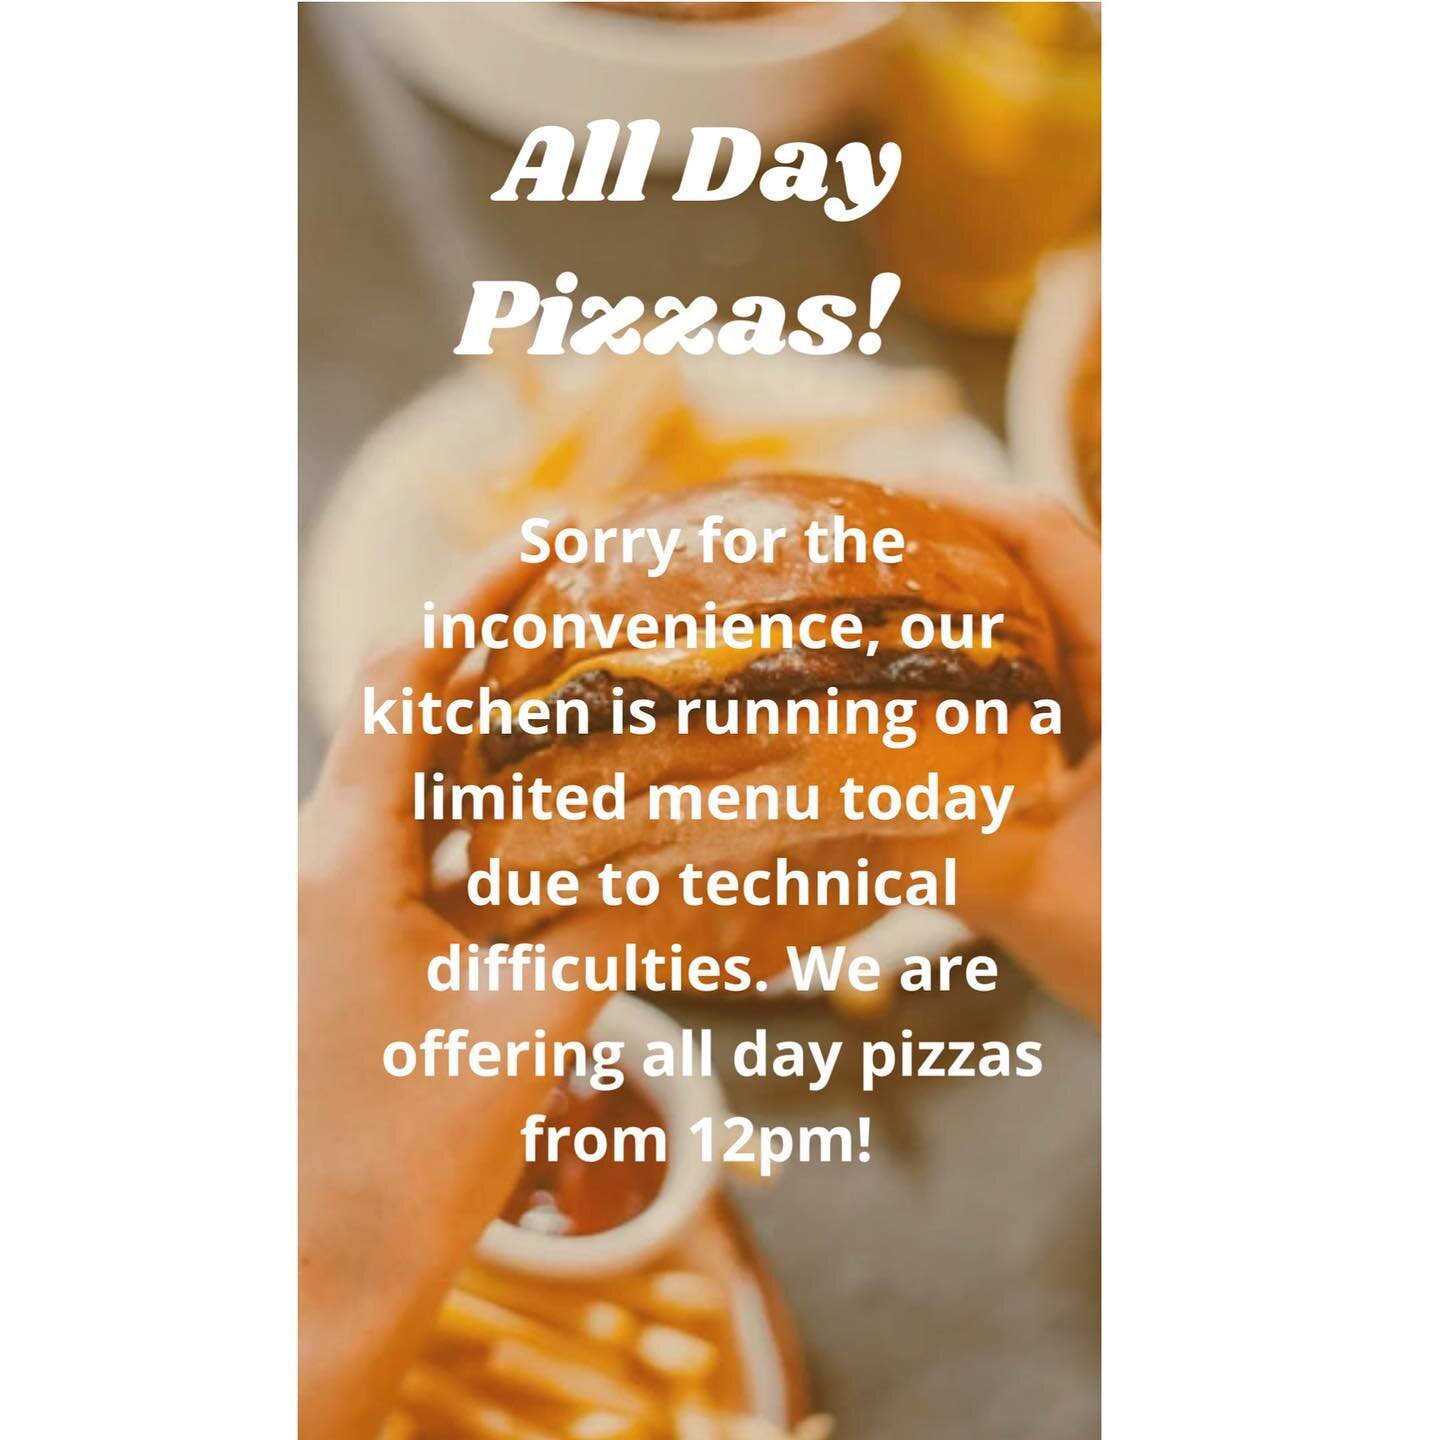 Sorry for the inconvenience everyone! Our kitchen due to technical difficulties will be on a limited menu today! We will be offering all day pizzas from 12pm for you guys! Thank you for understanding ☔️